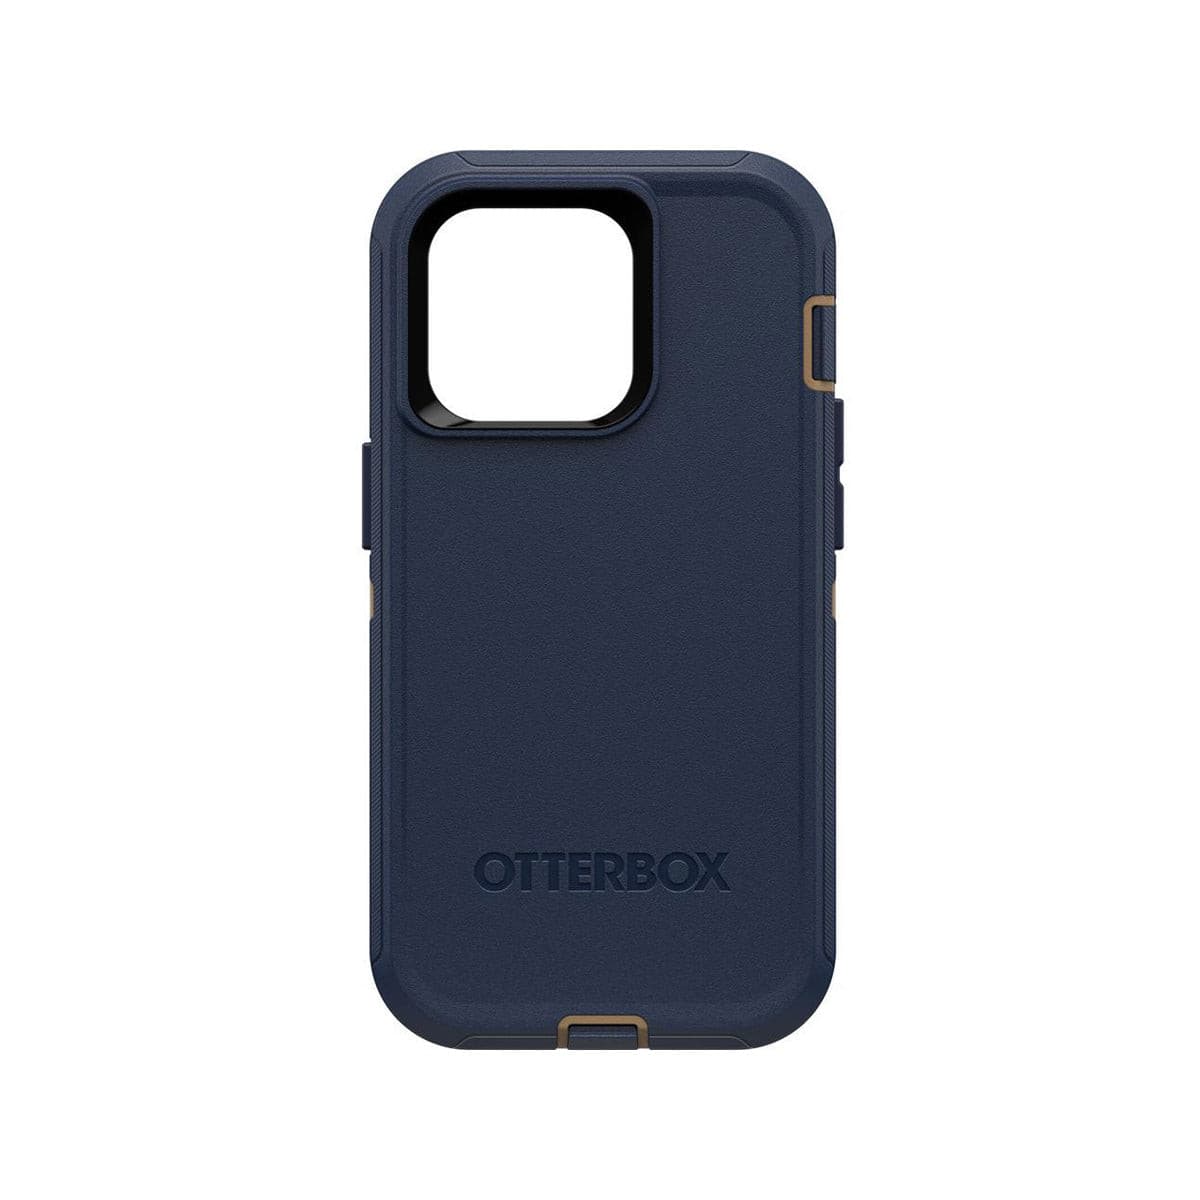 OtterBox Defender Case for iPhone 14 Pro.